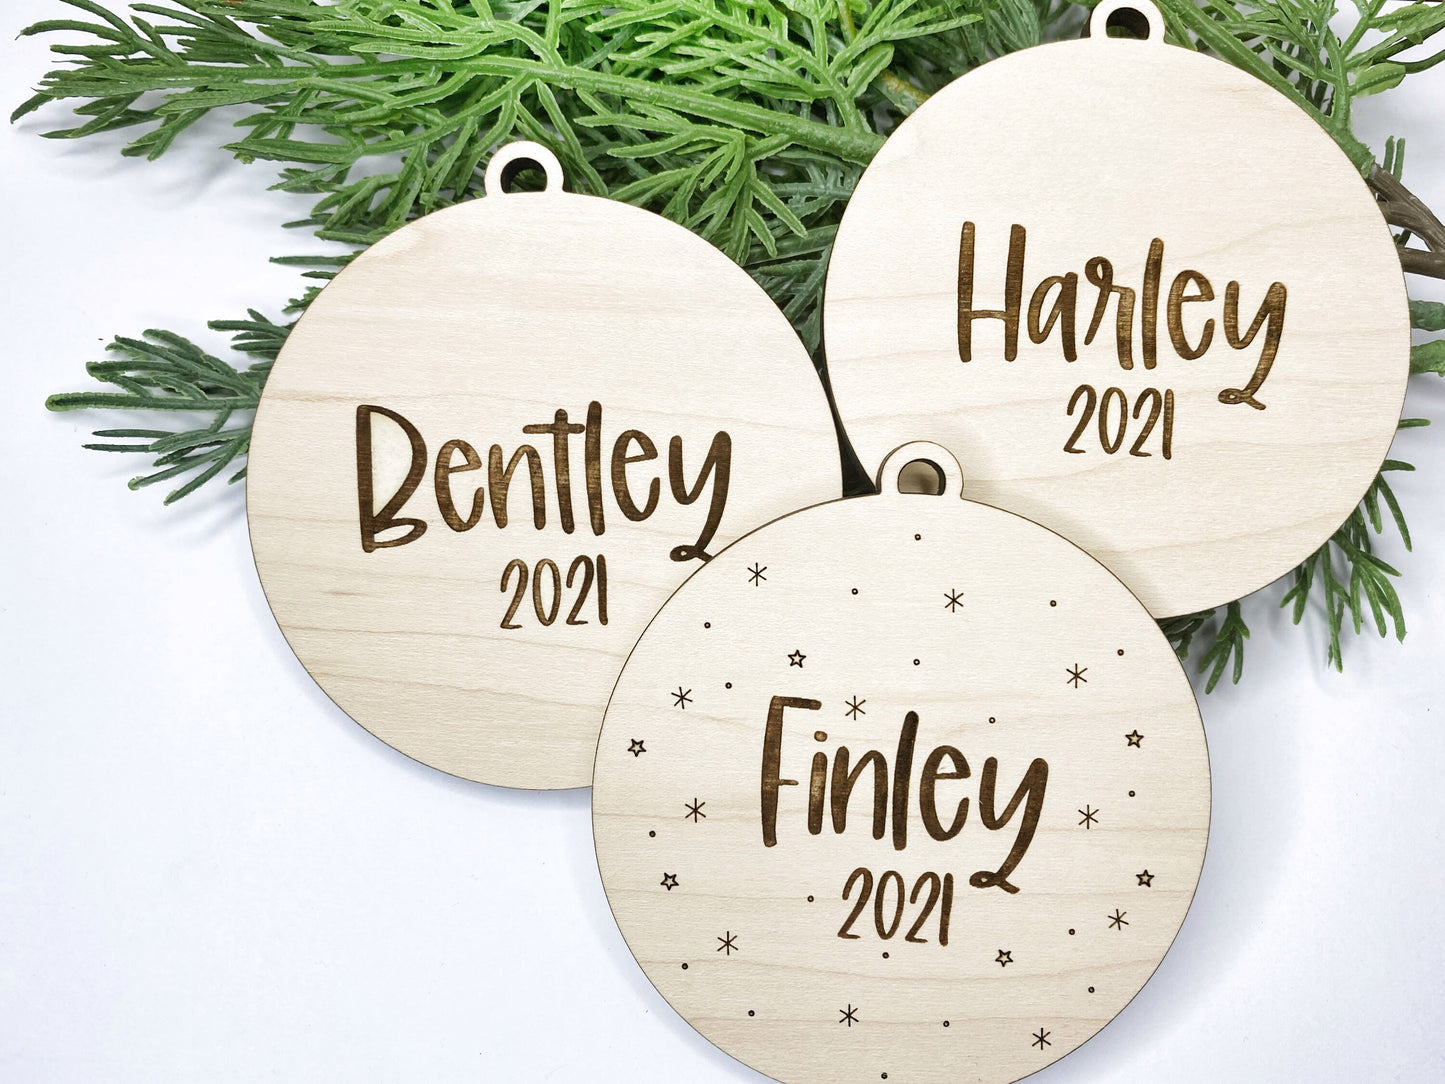 Kid Name Ornament, Personalized Christmas Ornament for Kids, 2021 Ornament First Name Ornament